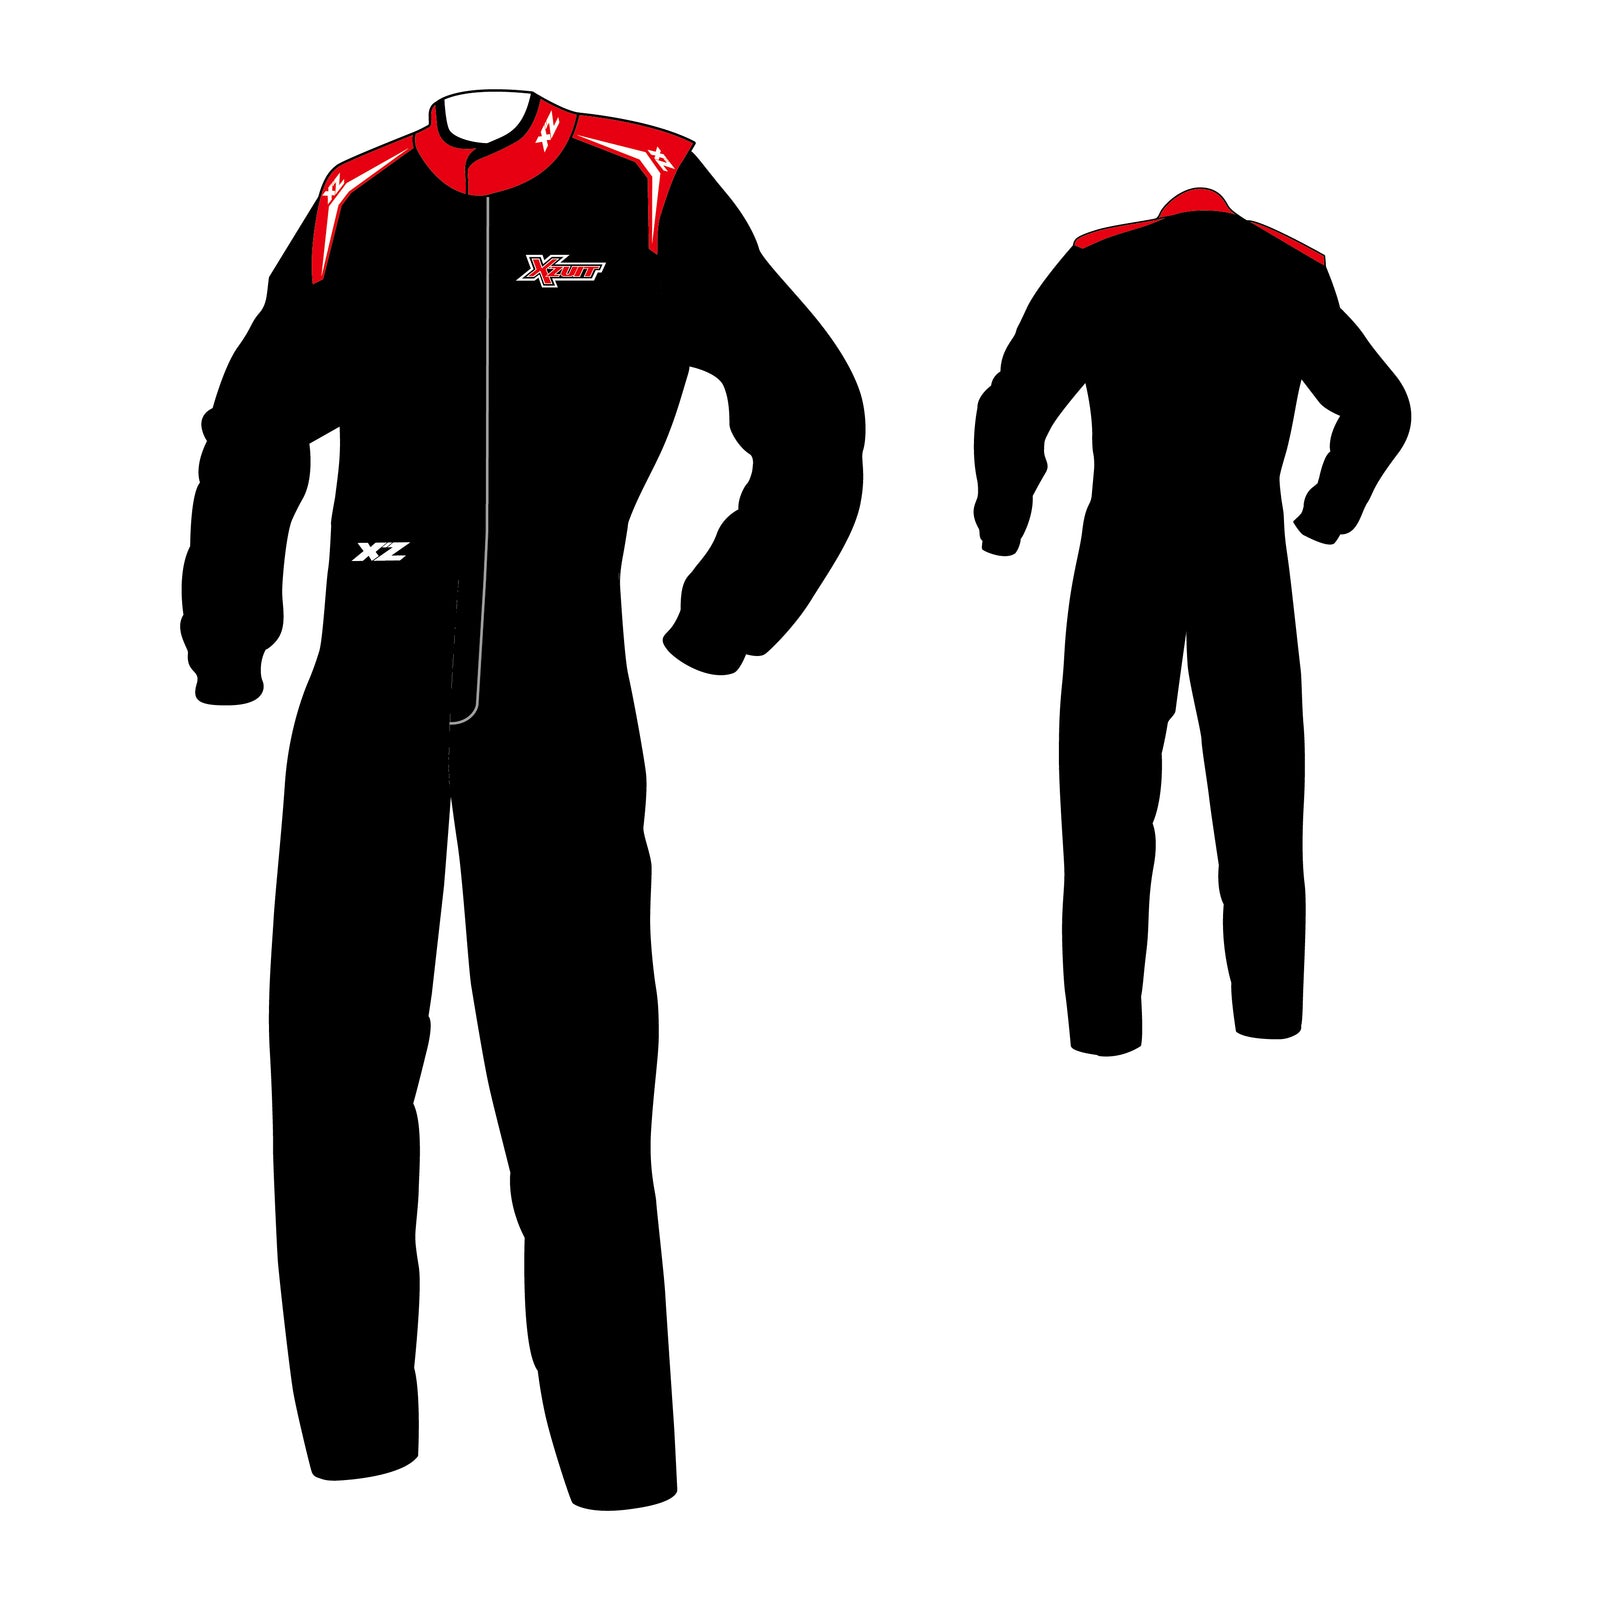 Men's race suit made with fire resistant material that is in compliance with FIA 8856-2000 regulation